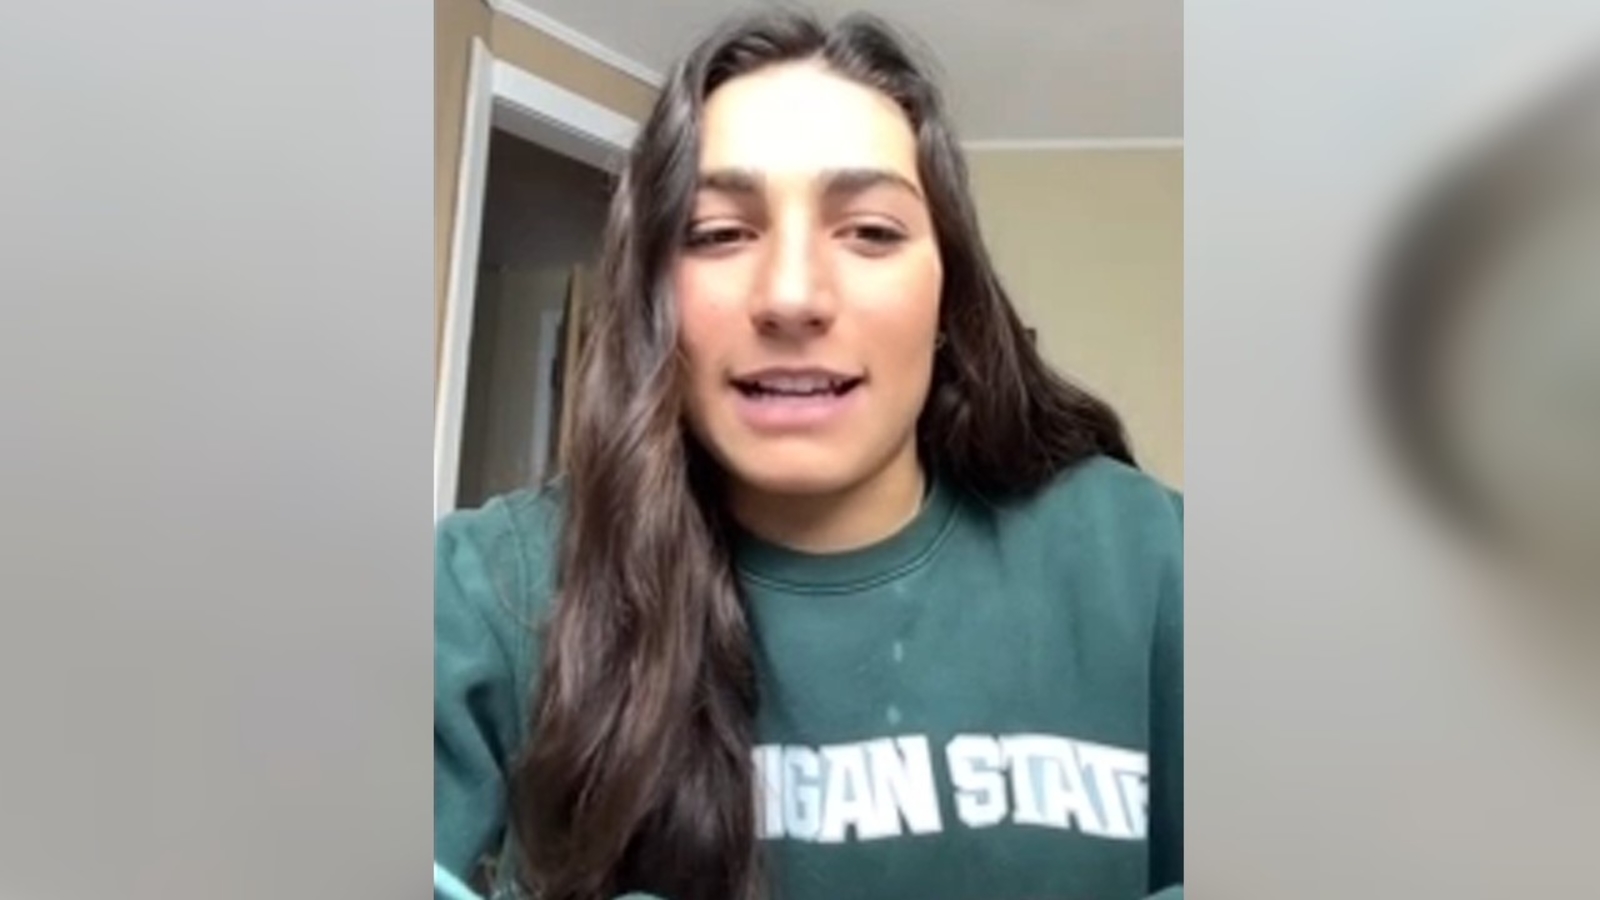 Michigan State University student who survived Sandy Hook massacre speaks out after shooting